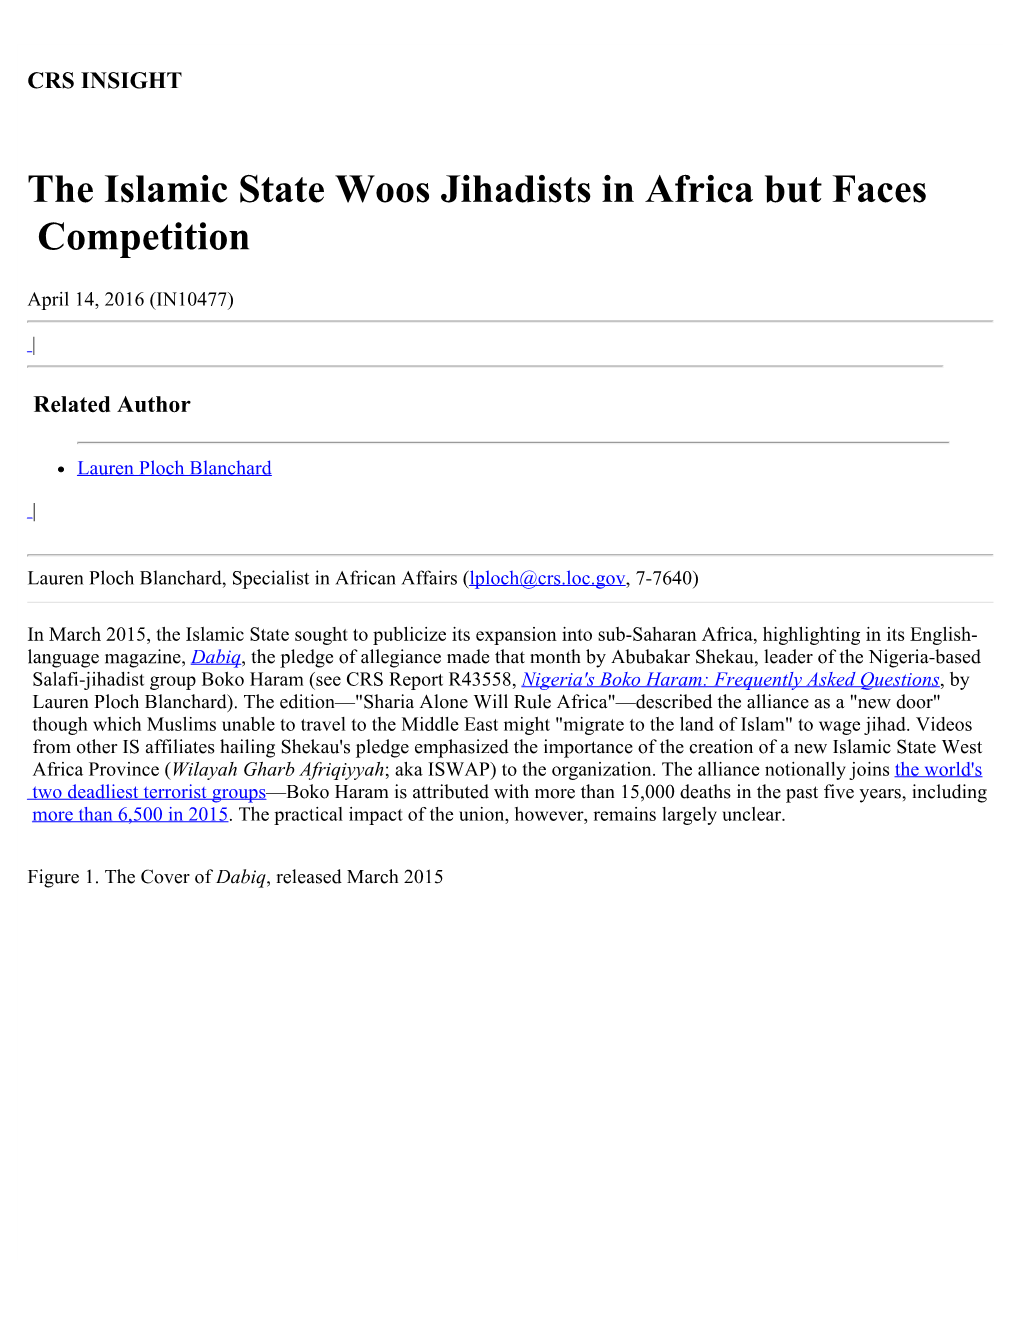 The Islamic State Woos Jihadists in Africa but Faces Competition